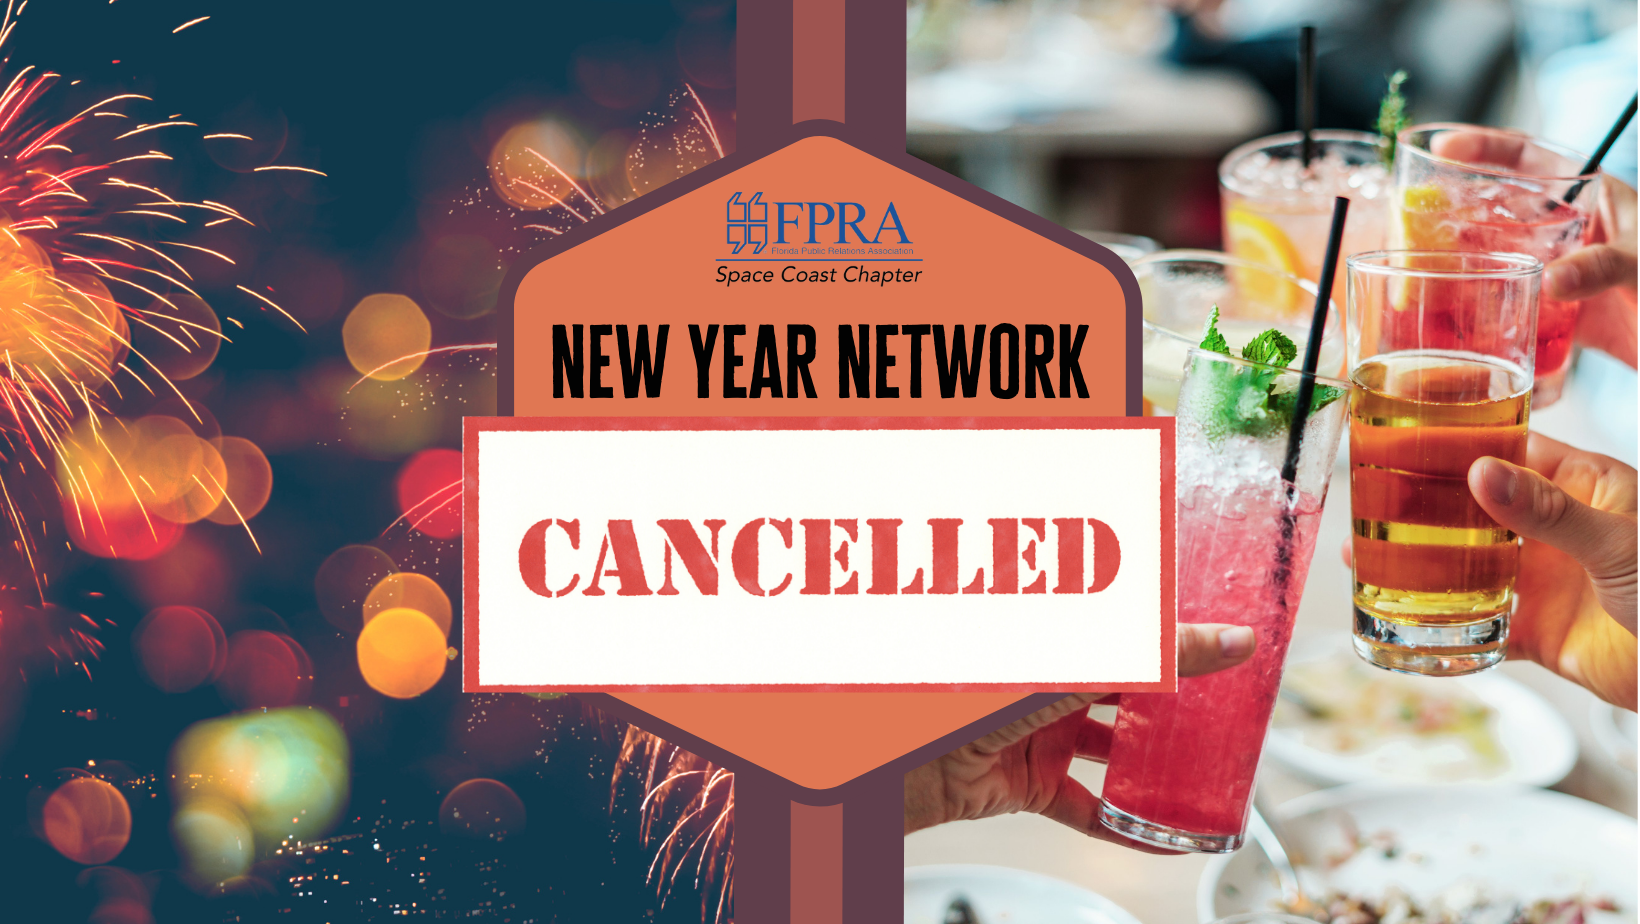 New Year Network Cancelled